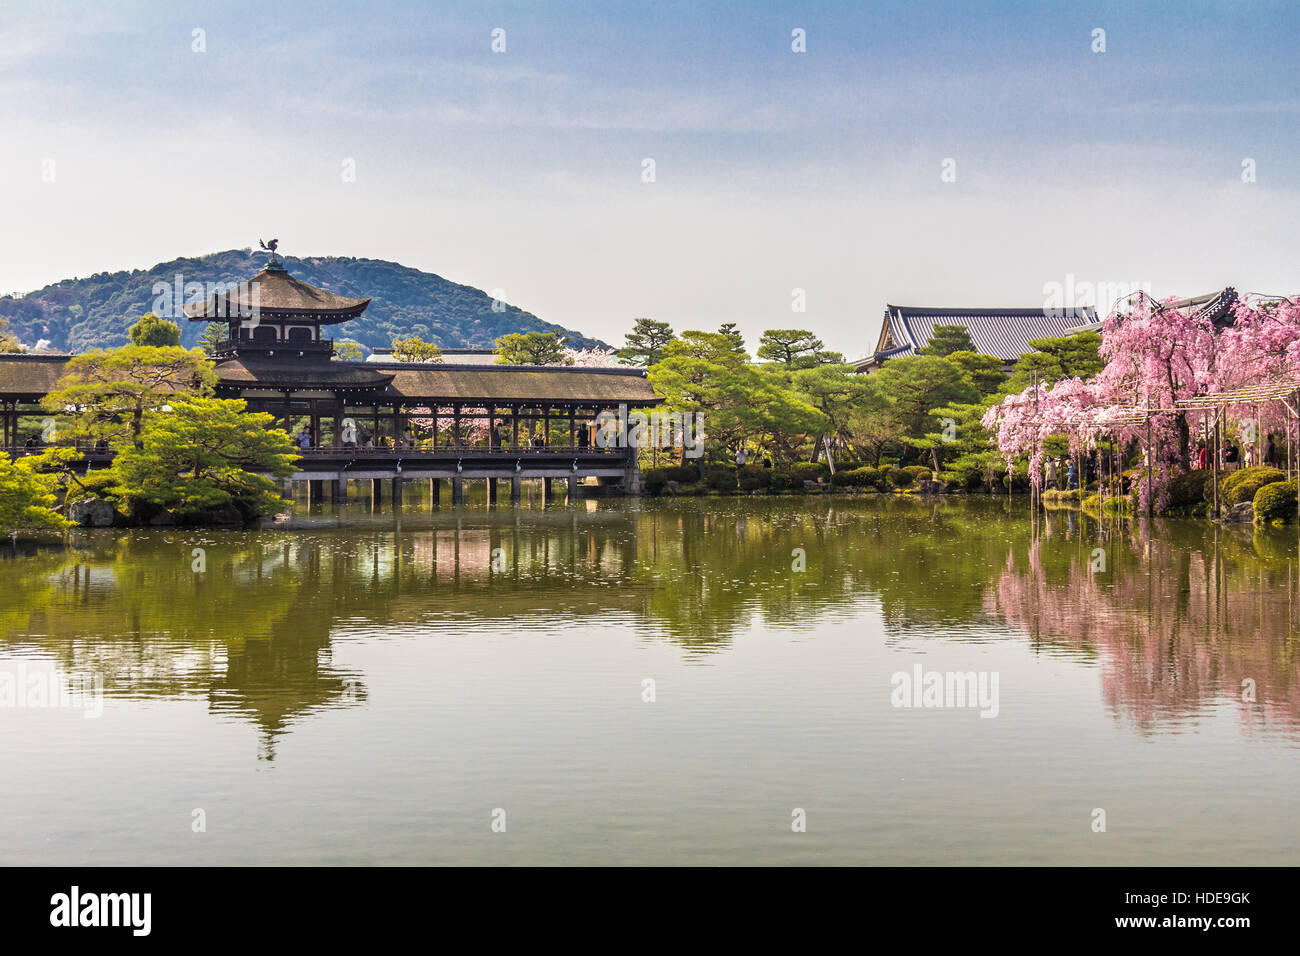 Imperial Palace garden in Kyoto Japan Stock Photo